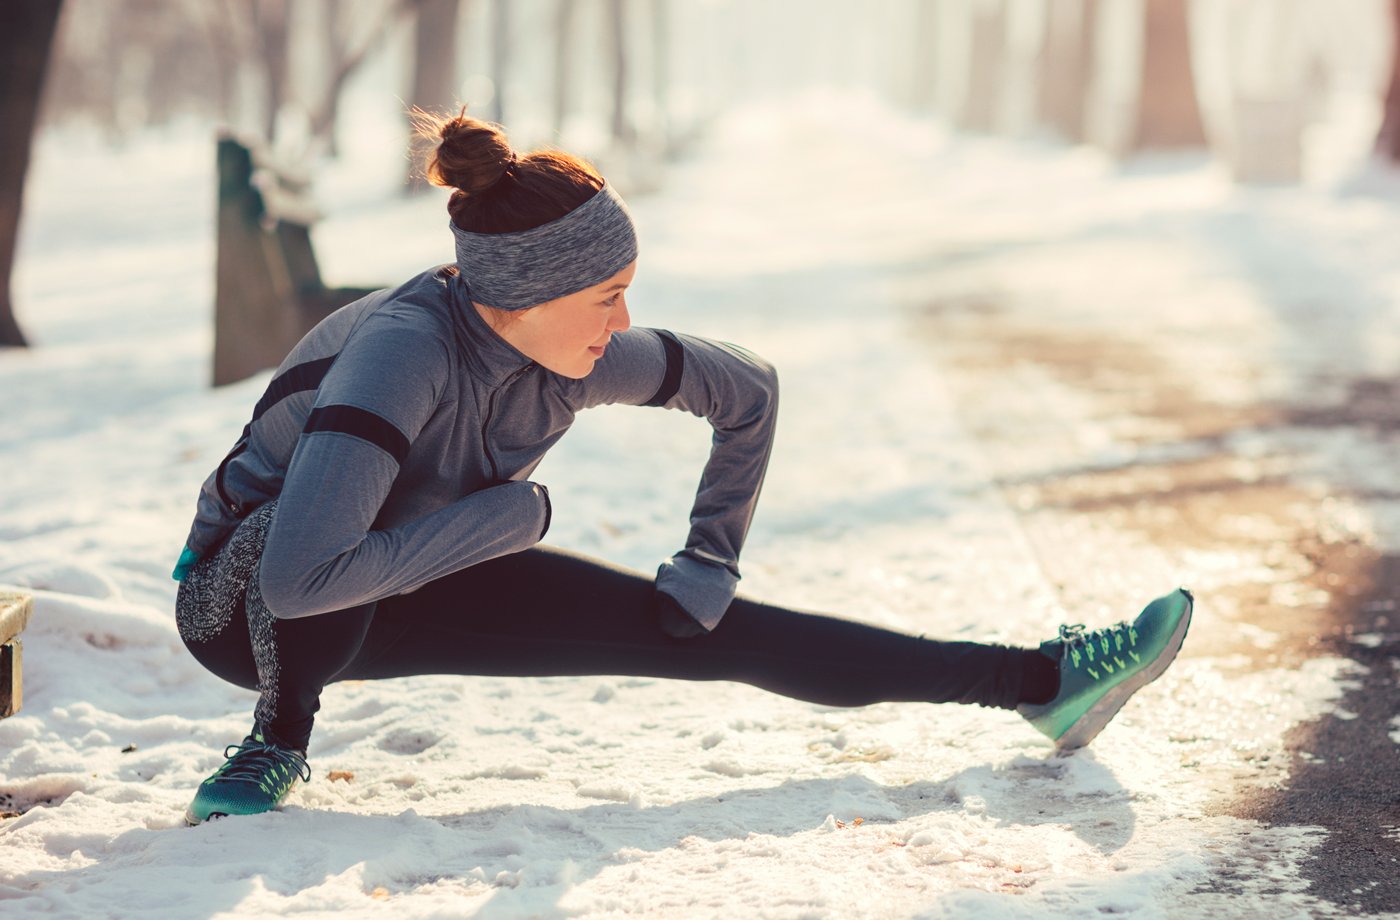 These are the best tights and winter clothes for runs in the freezing cold